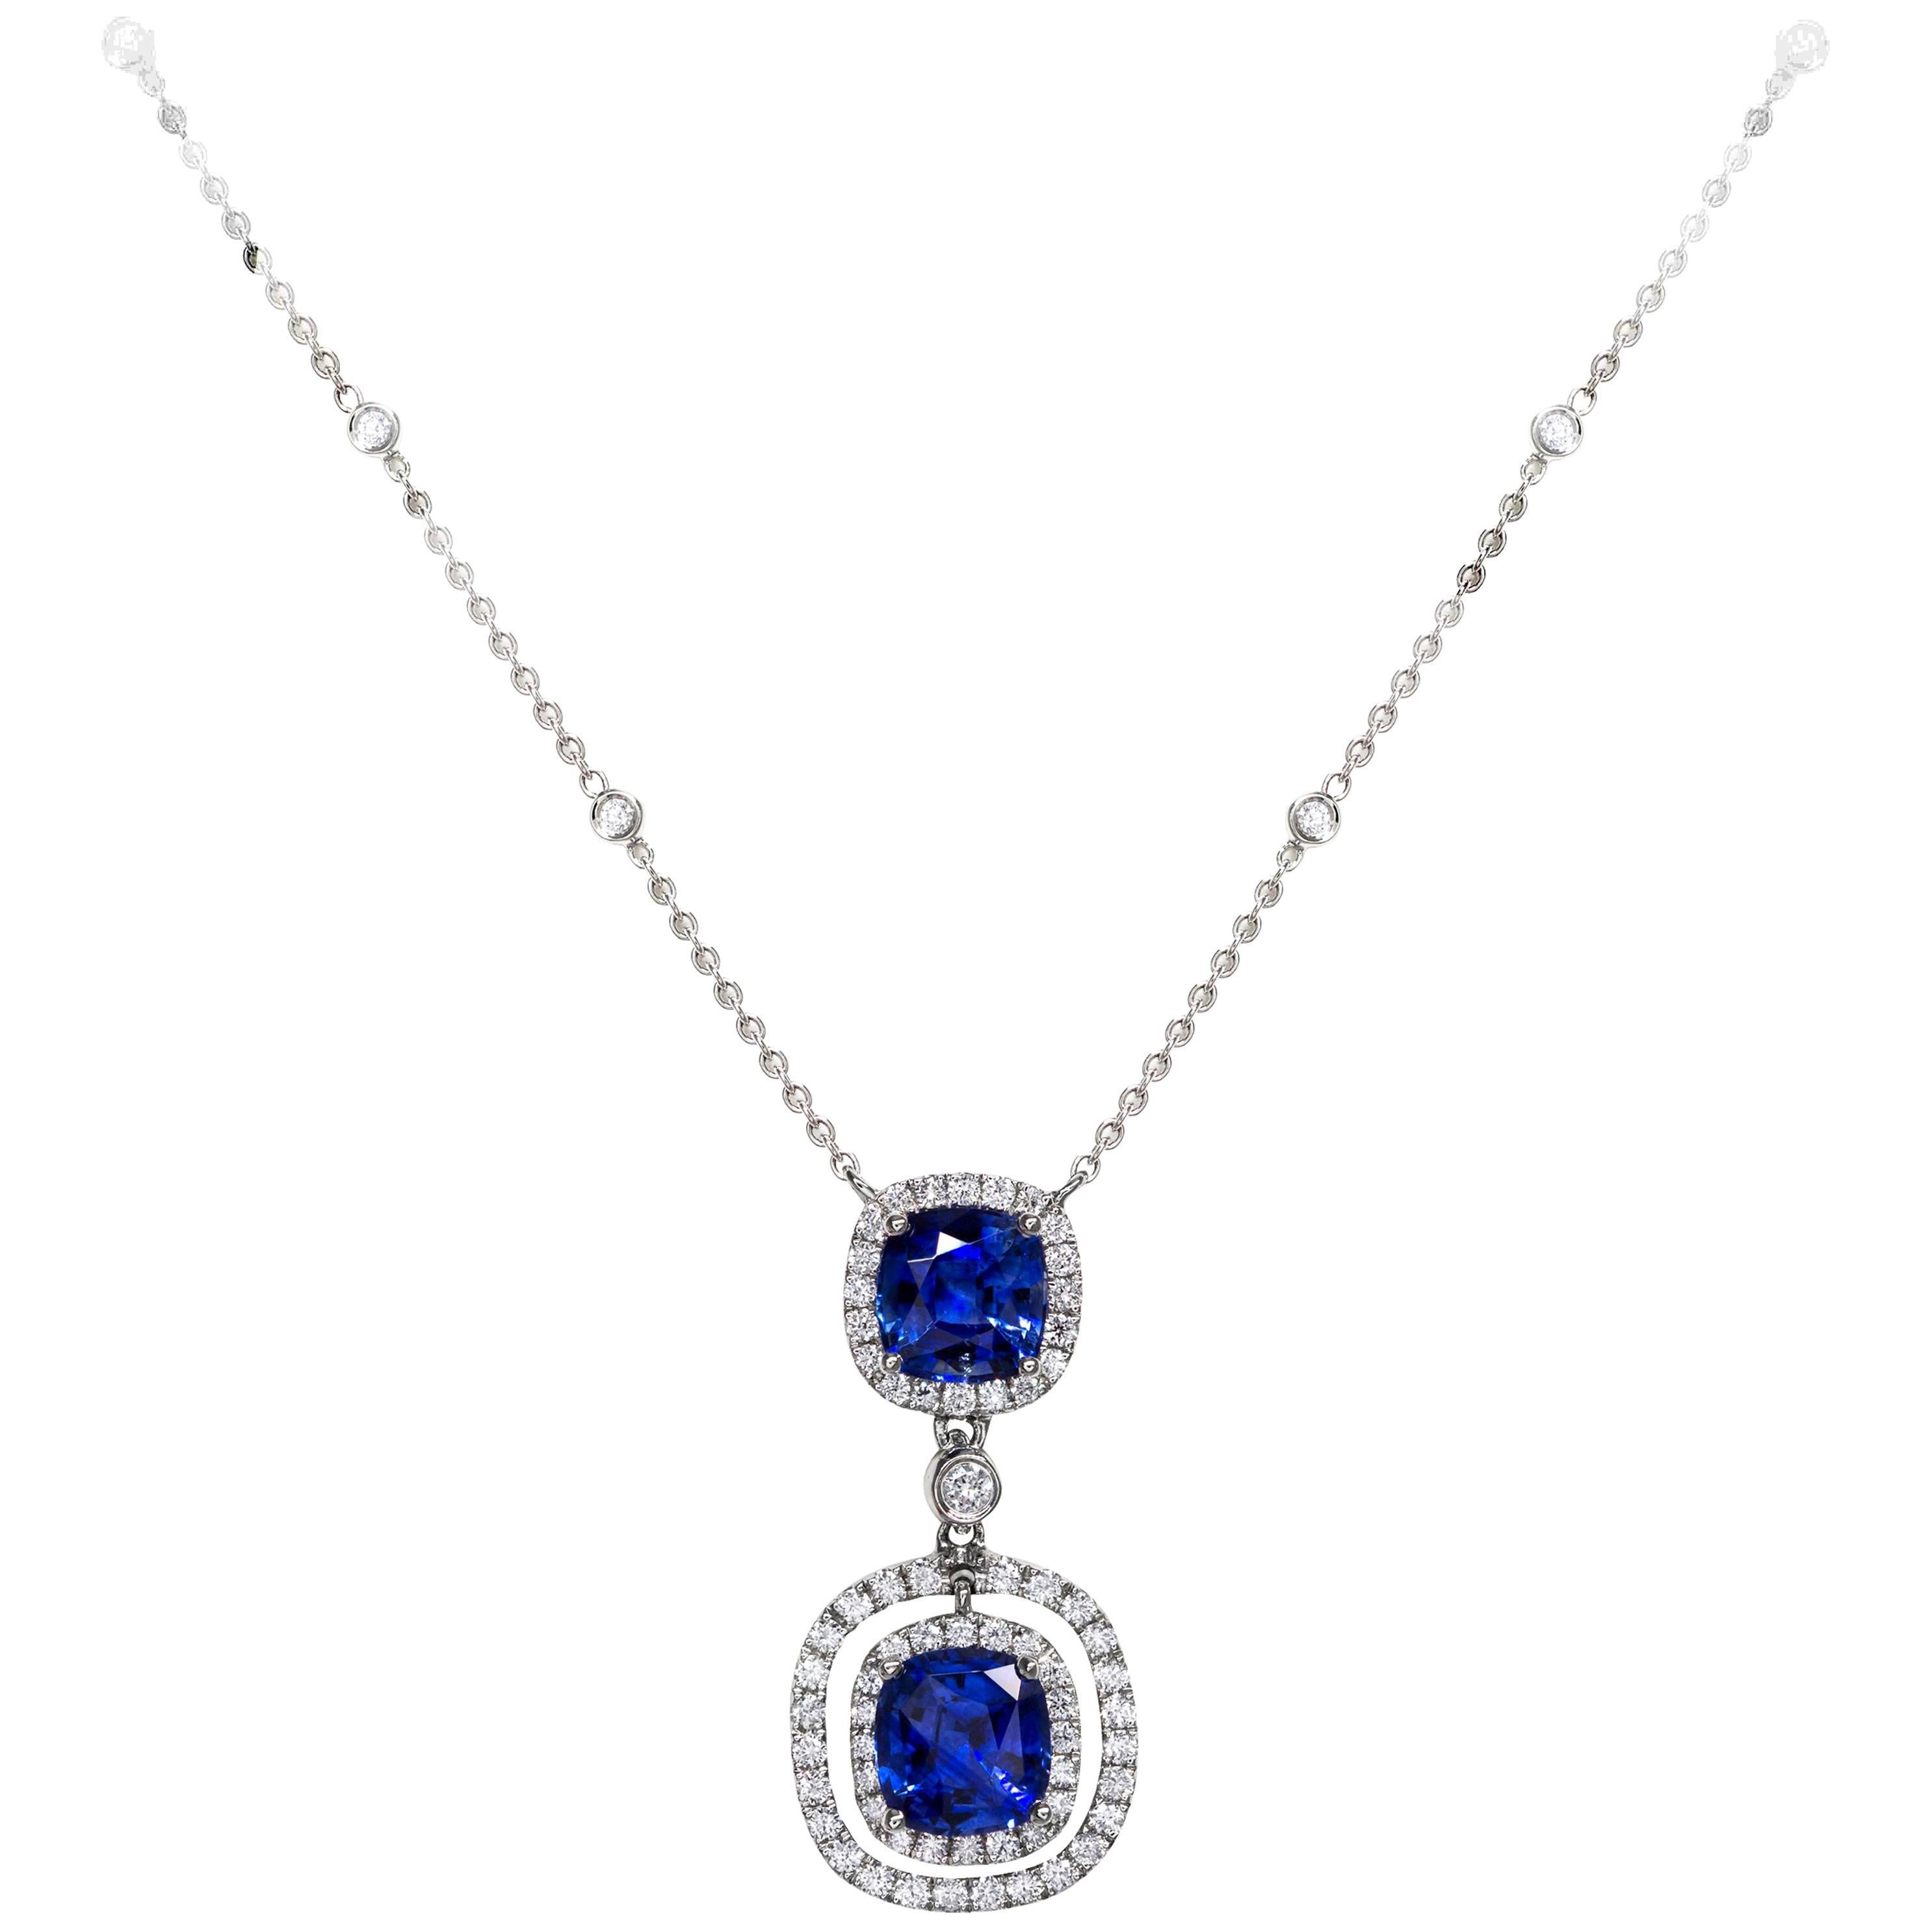 2.20 Carats Total Cushion Cut Blue Sapphire and Diamond Halo Pendant Necklace